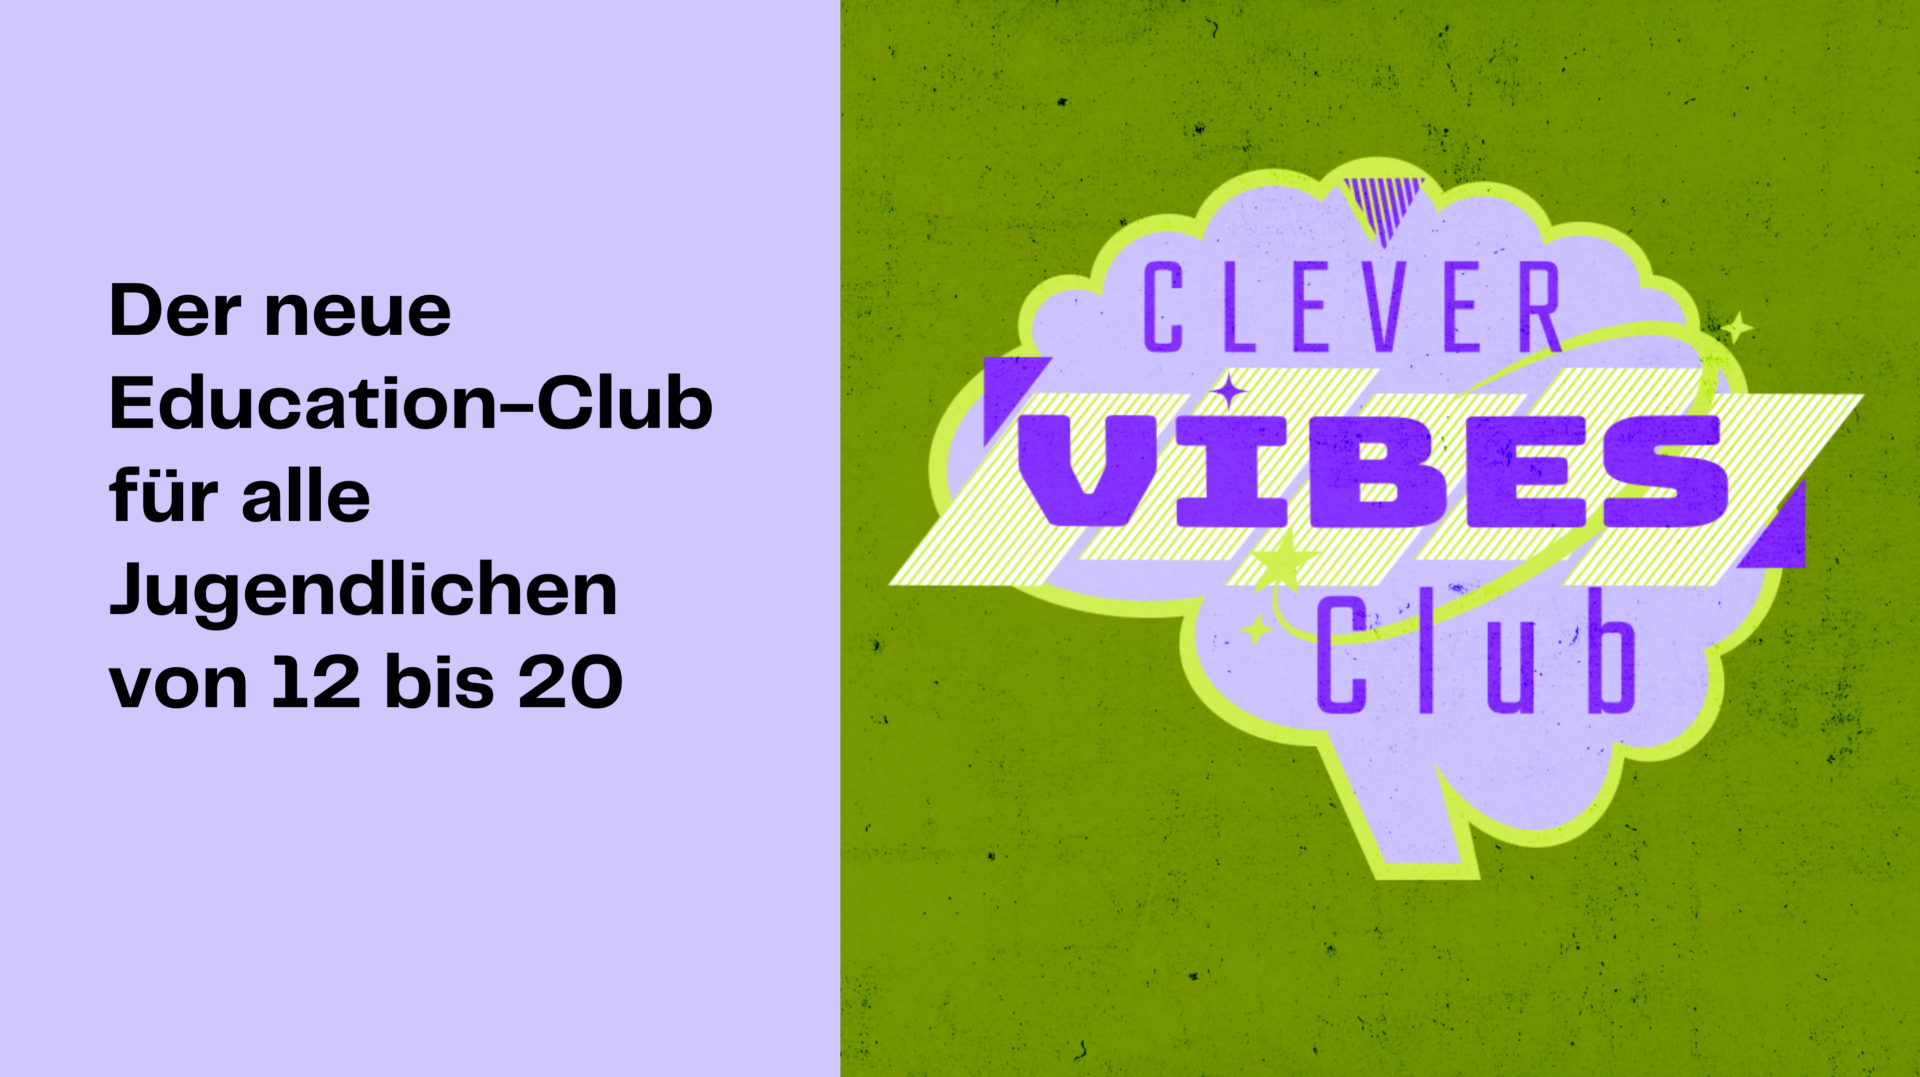 Clever Vibes Club